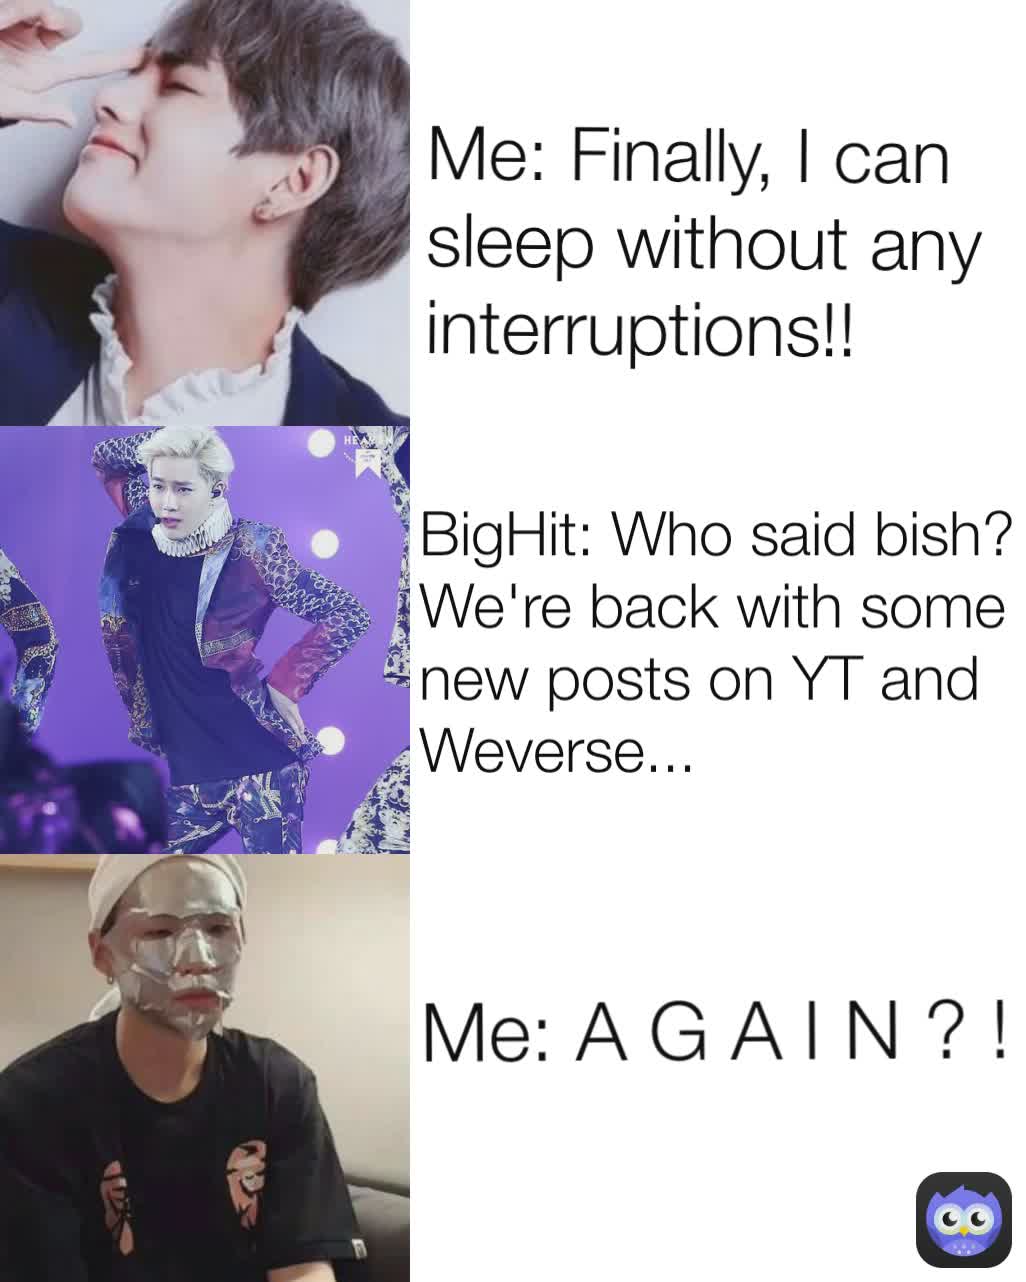 Me: A G A I N ? ! BigHit: Who said bish? We're back with some new posts on YT and Weverse... Me: Finally, I can sleep without any interruptions!! 